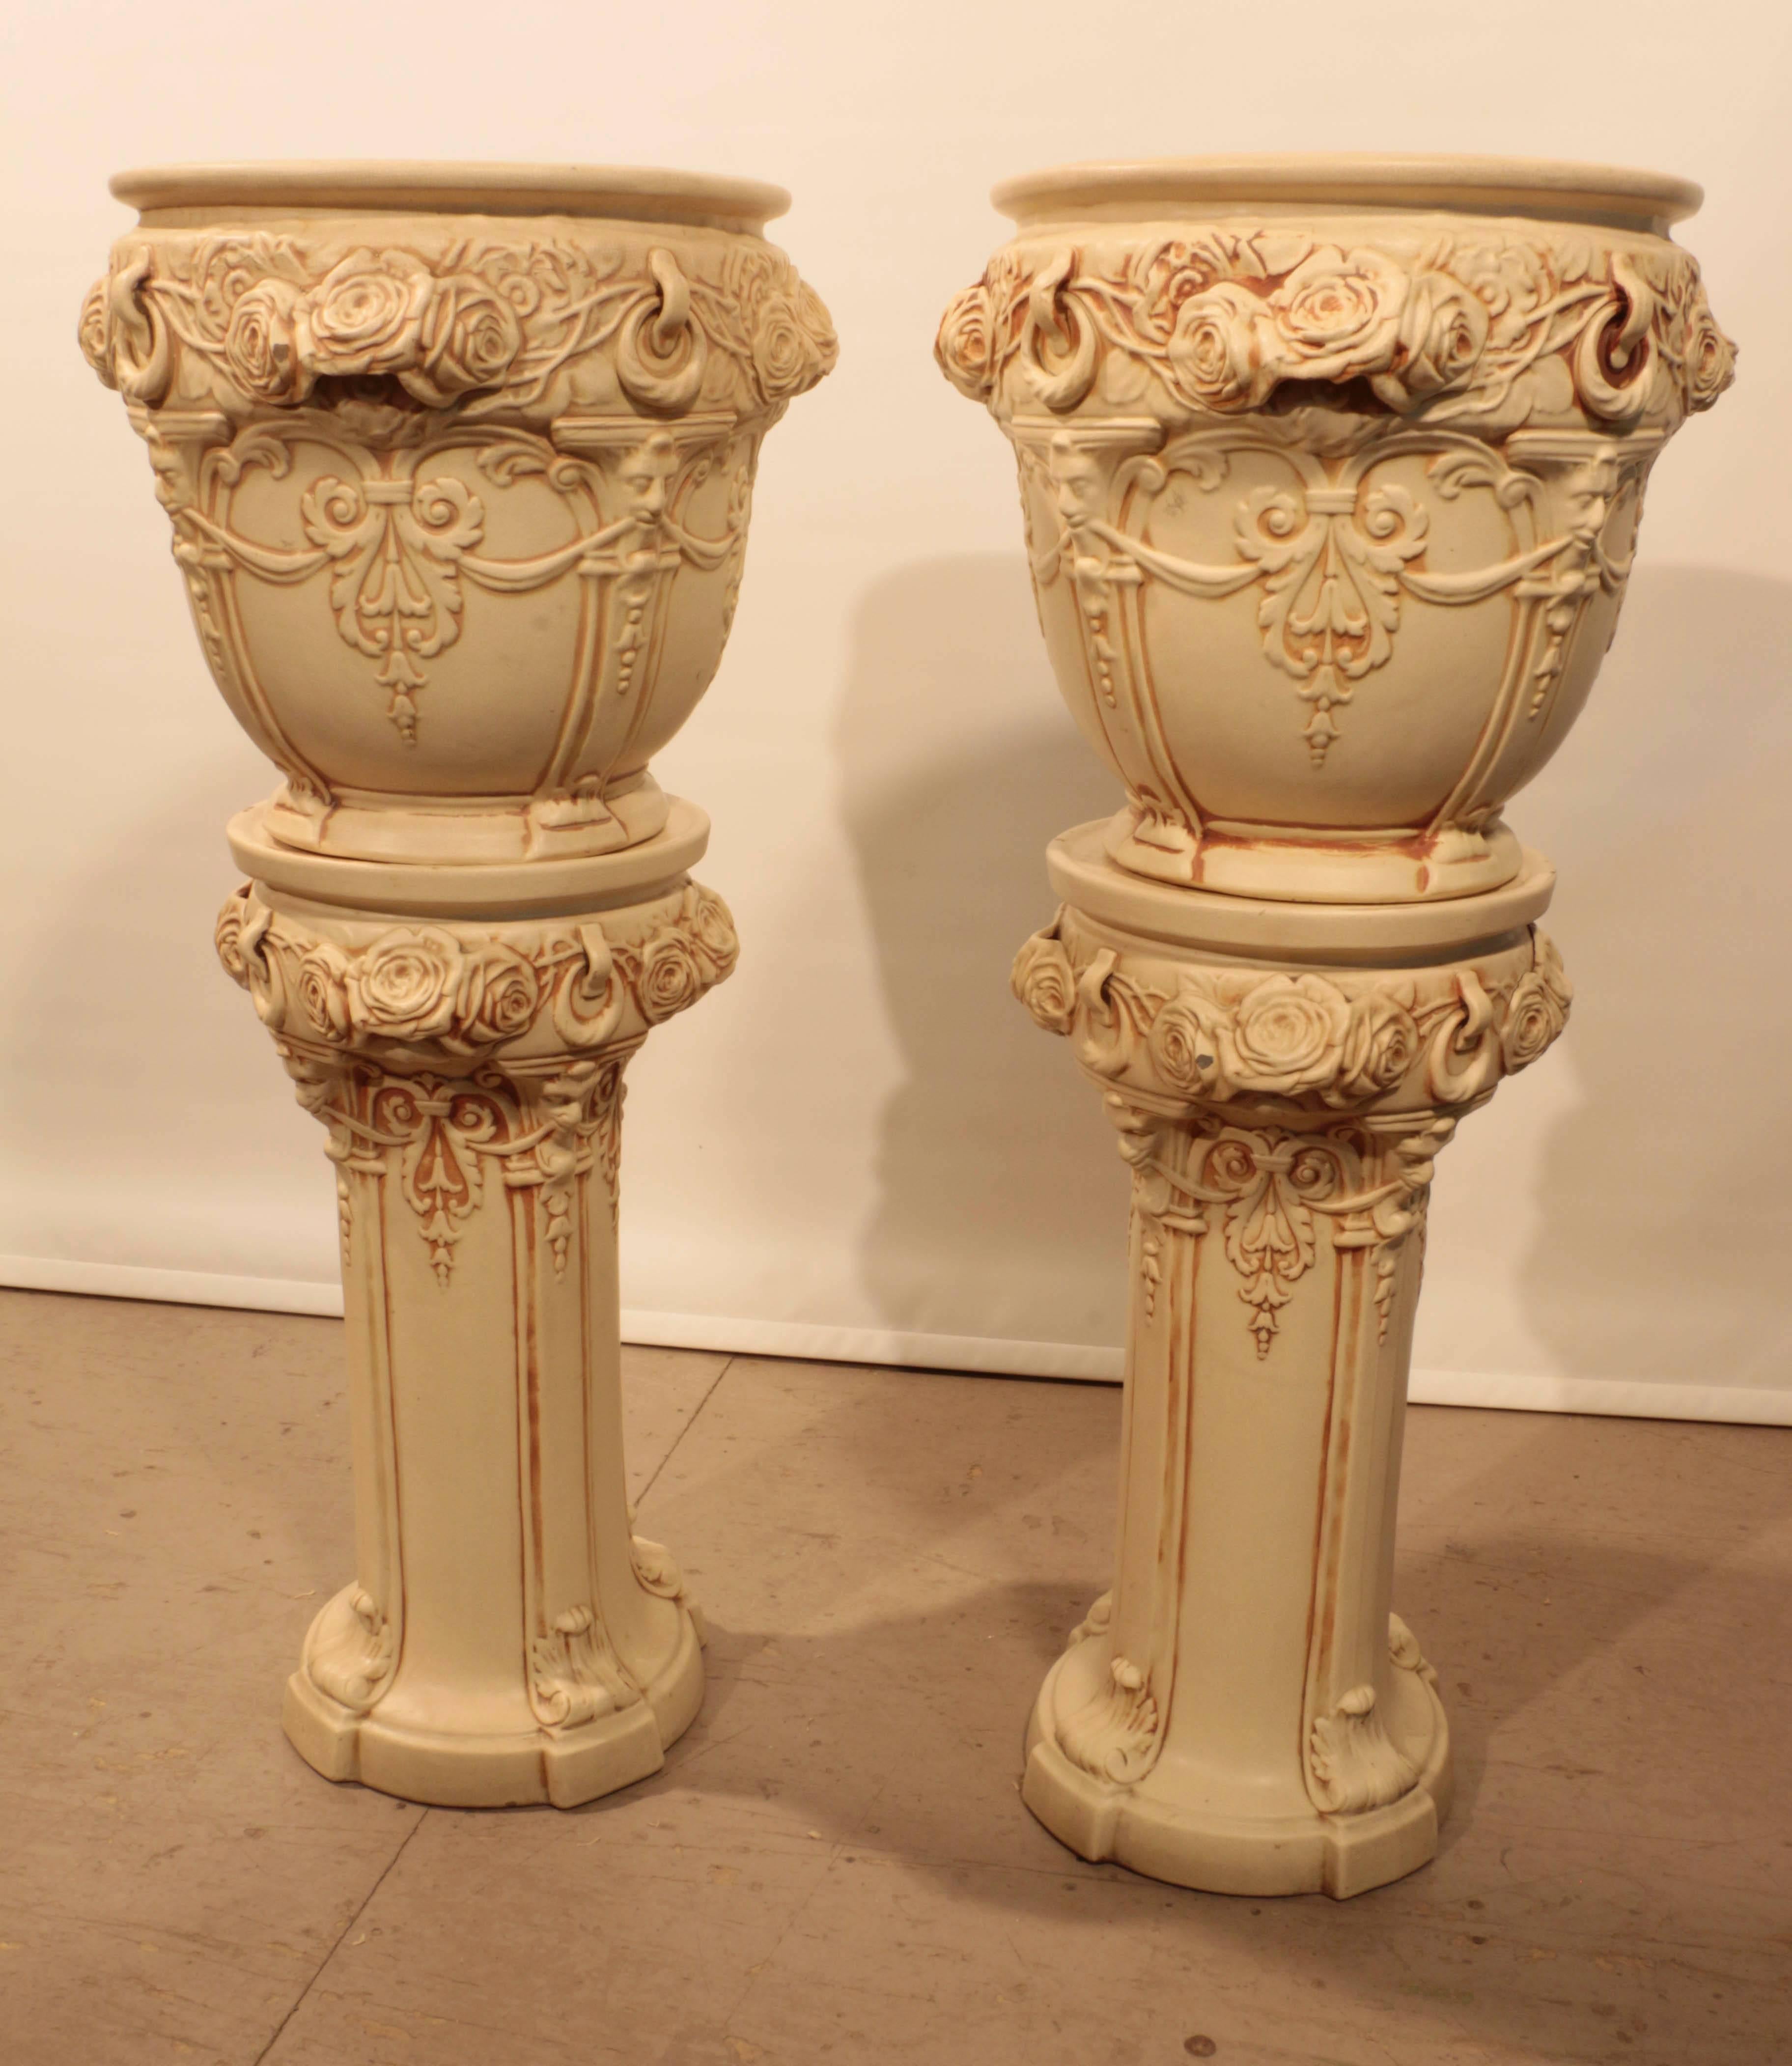 Pair of Weller Clinton Ivory Art Nouveau Jardinaires,  on Stand with Rosebud Design.